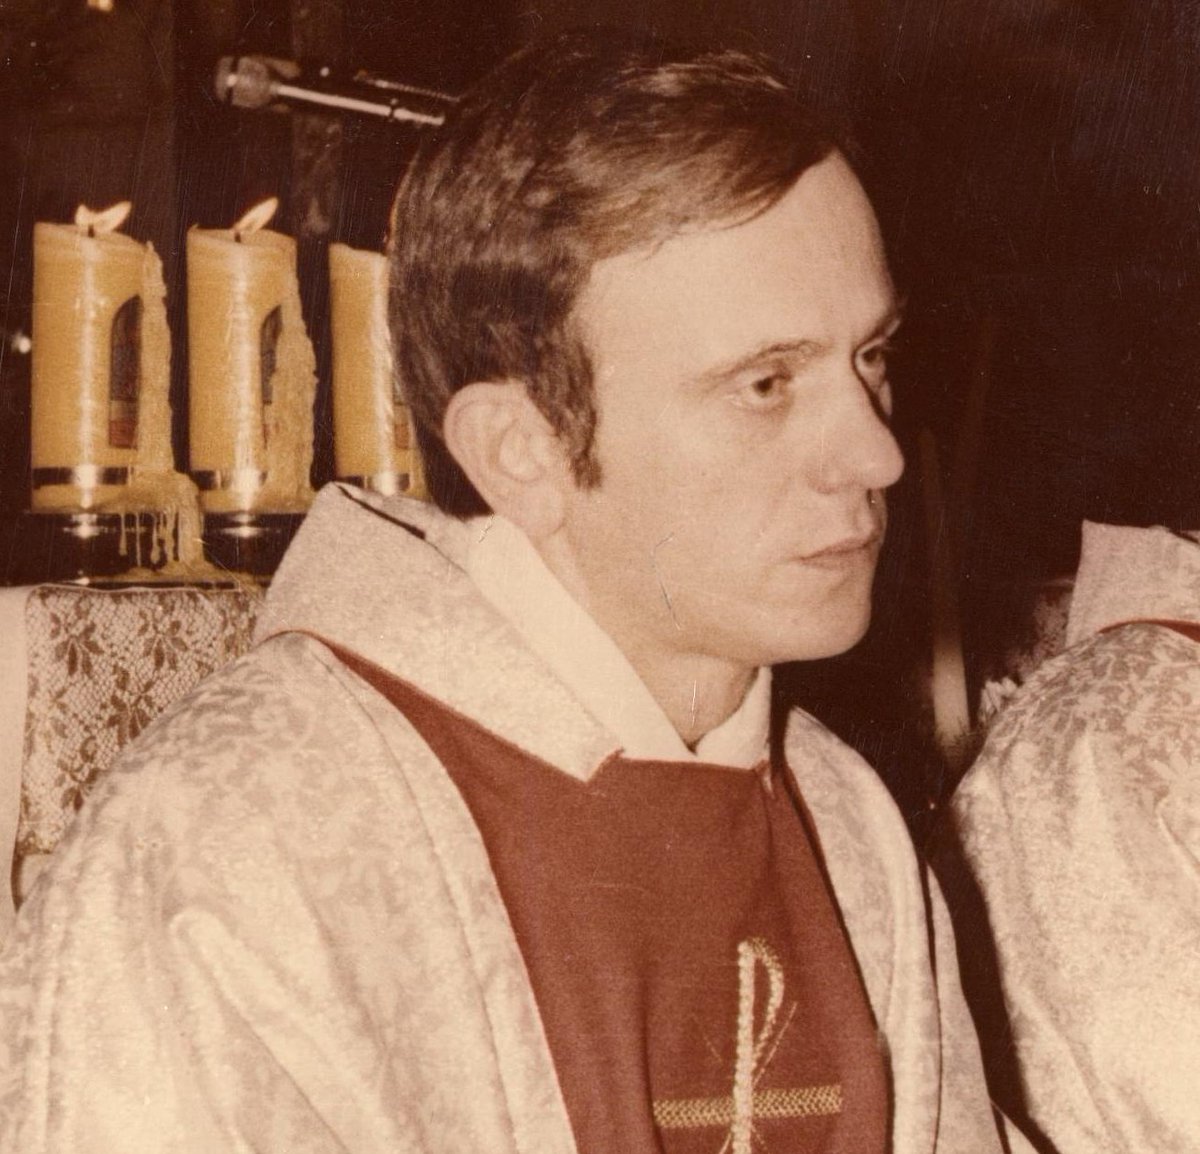 We commemorate today Bl. Fr. Jerzy Popieluszko, martyr. He was an ardent pastor of the working class, health service, the poor and persecuted. 1980-1984 he became known for celebrating “Holy Masses for the fatherland” in St. Stanislaus Kostka Church in Warsaw.